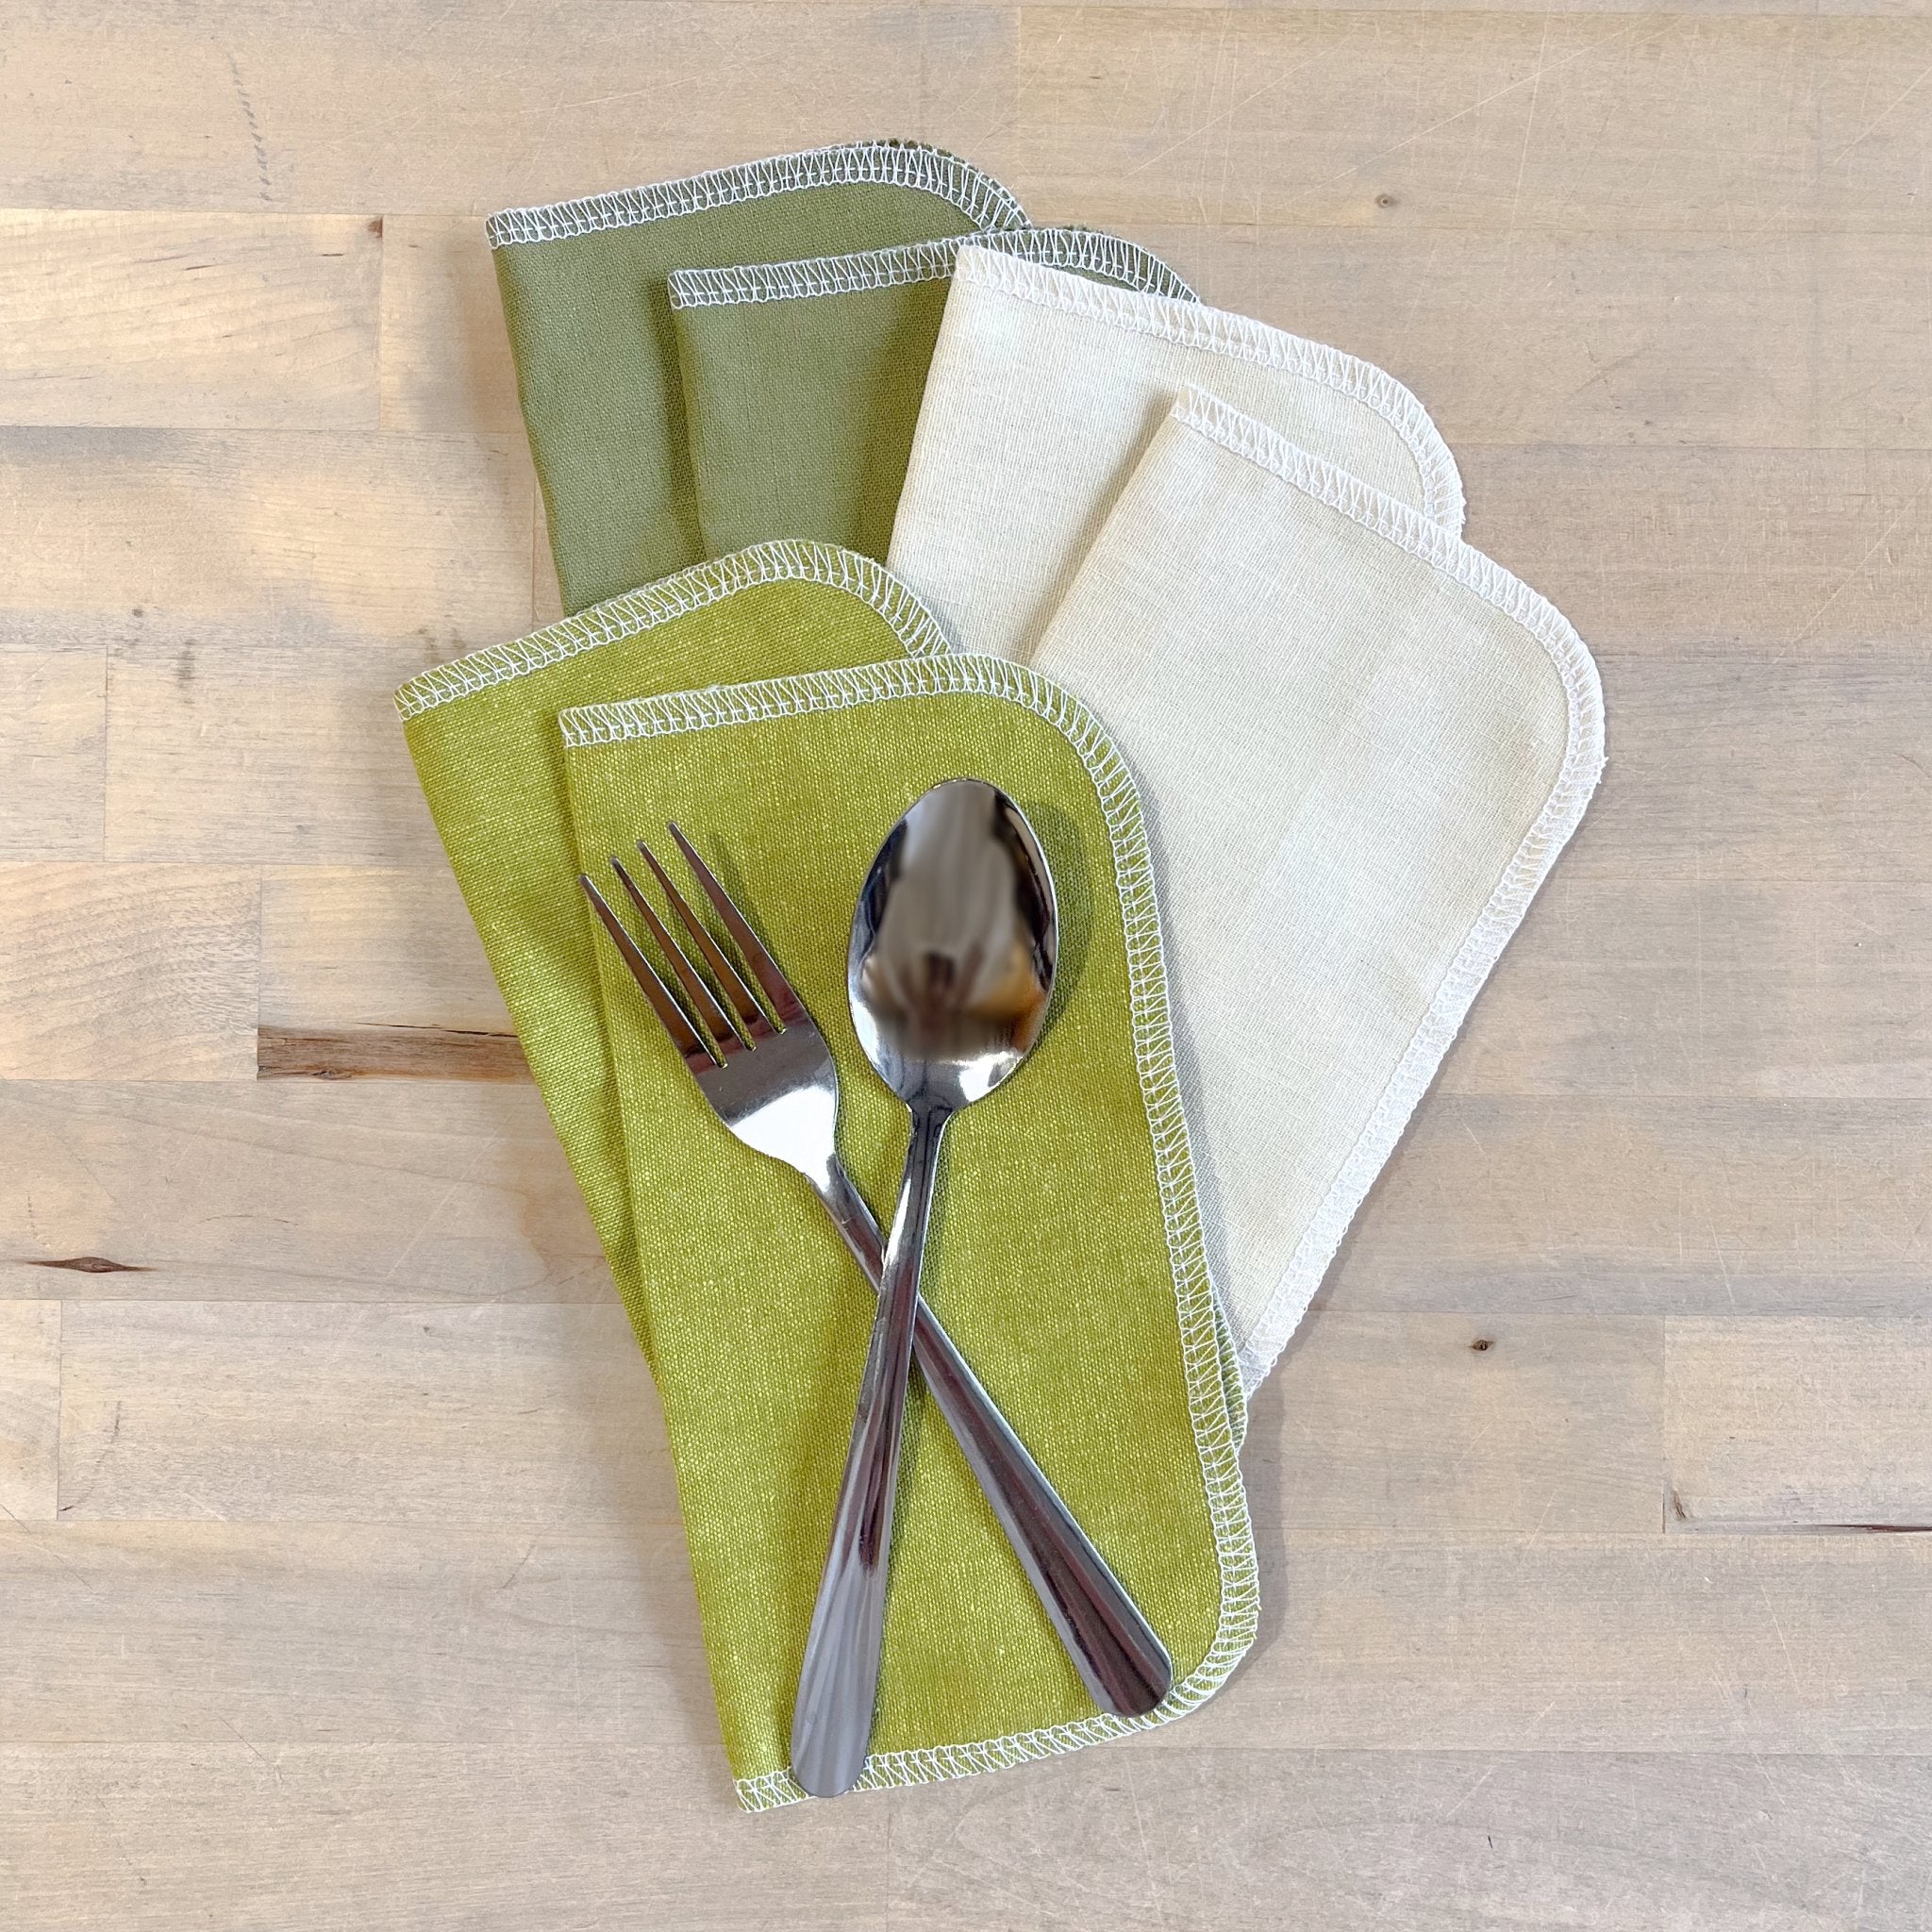 Small Linen Napkins: Tonal Sets 6-Pack - Marley's Monsters